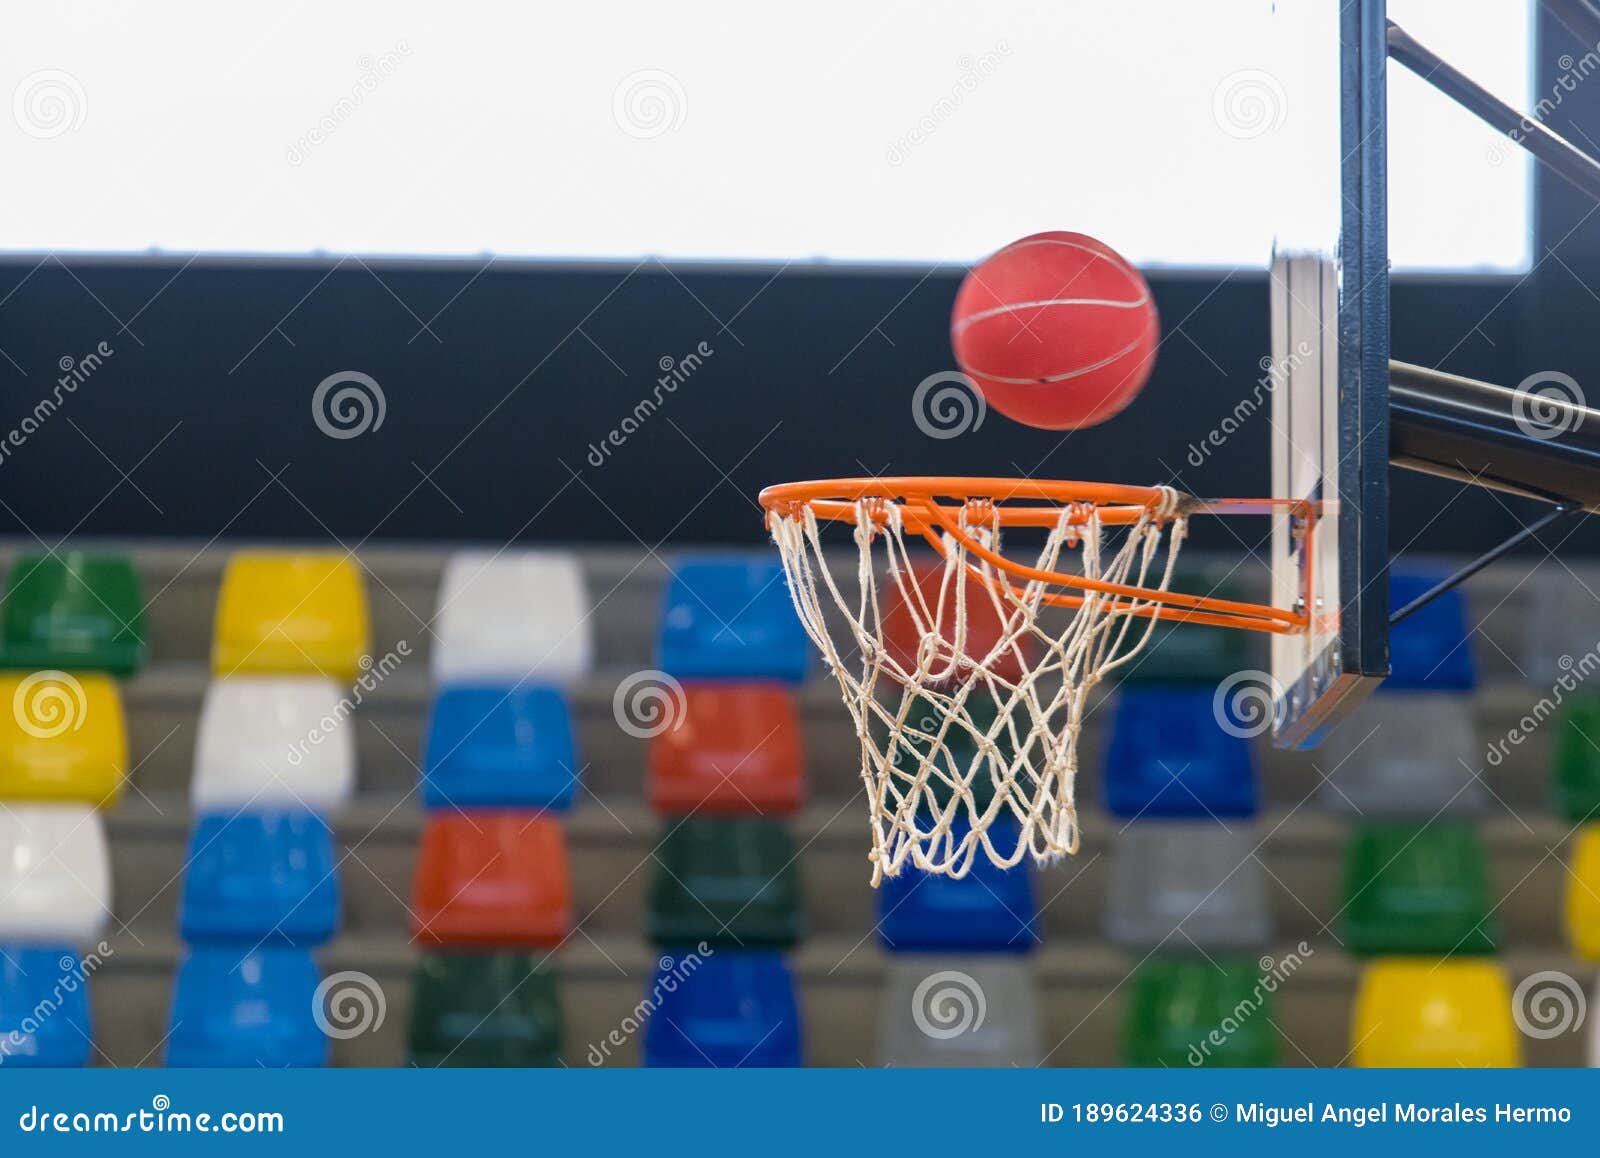 detail of a basketball about to enter the basket